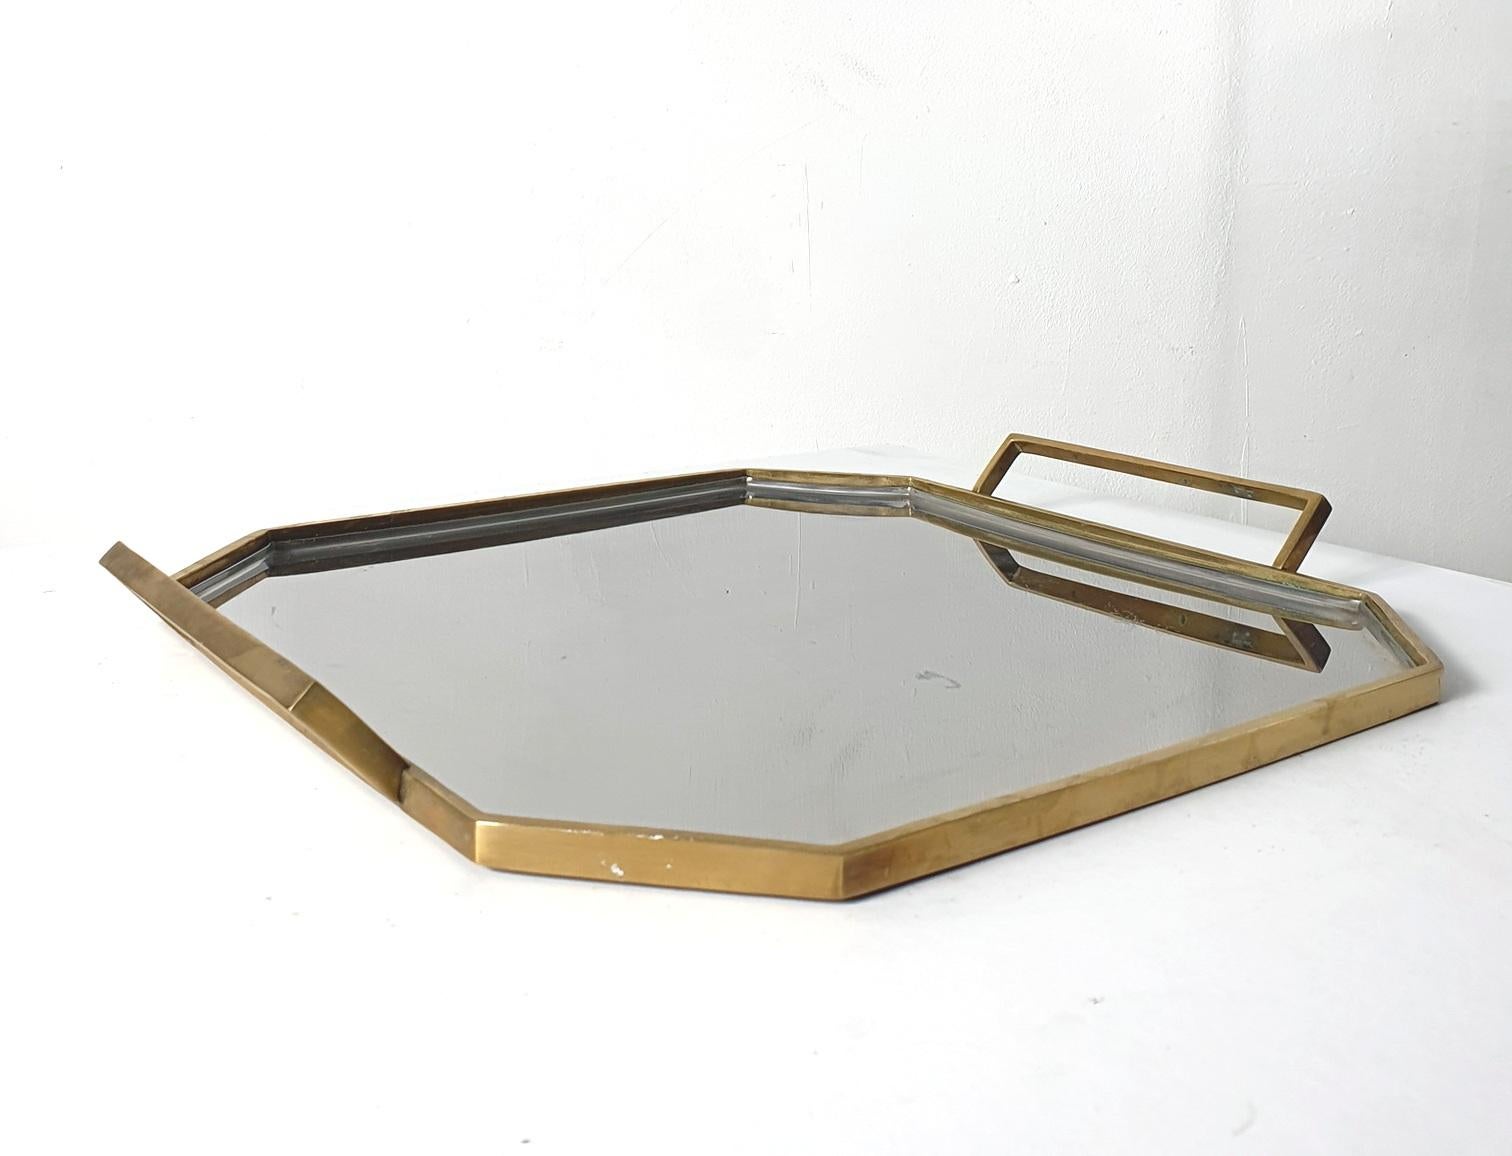 Glam octactonal tray in inox and brass with handles. It is very solid and well made in the execution and carries some weight. Perfect for serving your cocktails and snacks on. In very good condition.